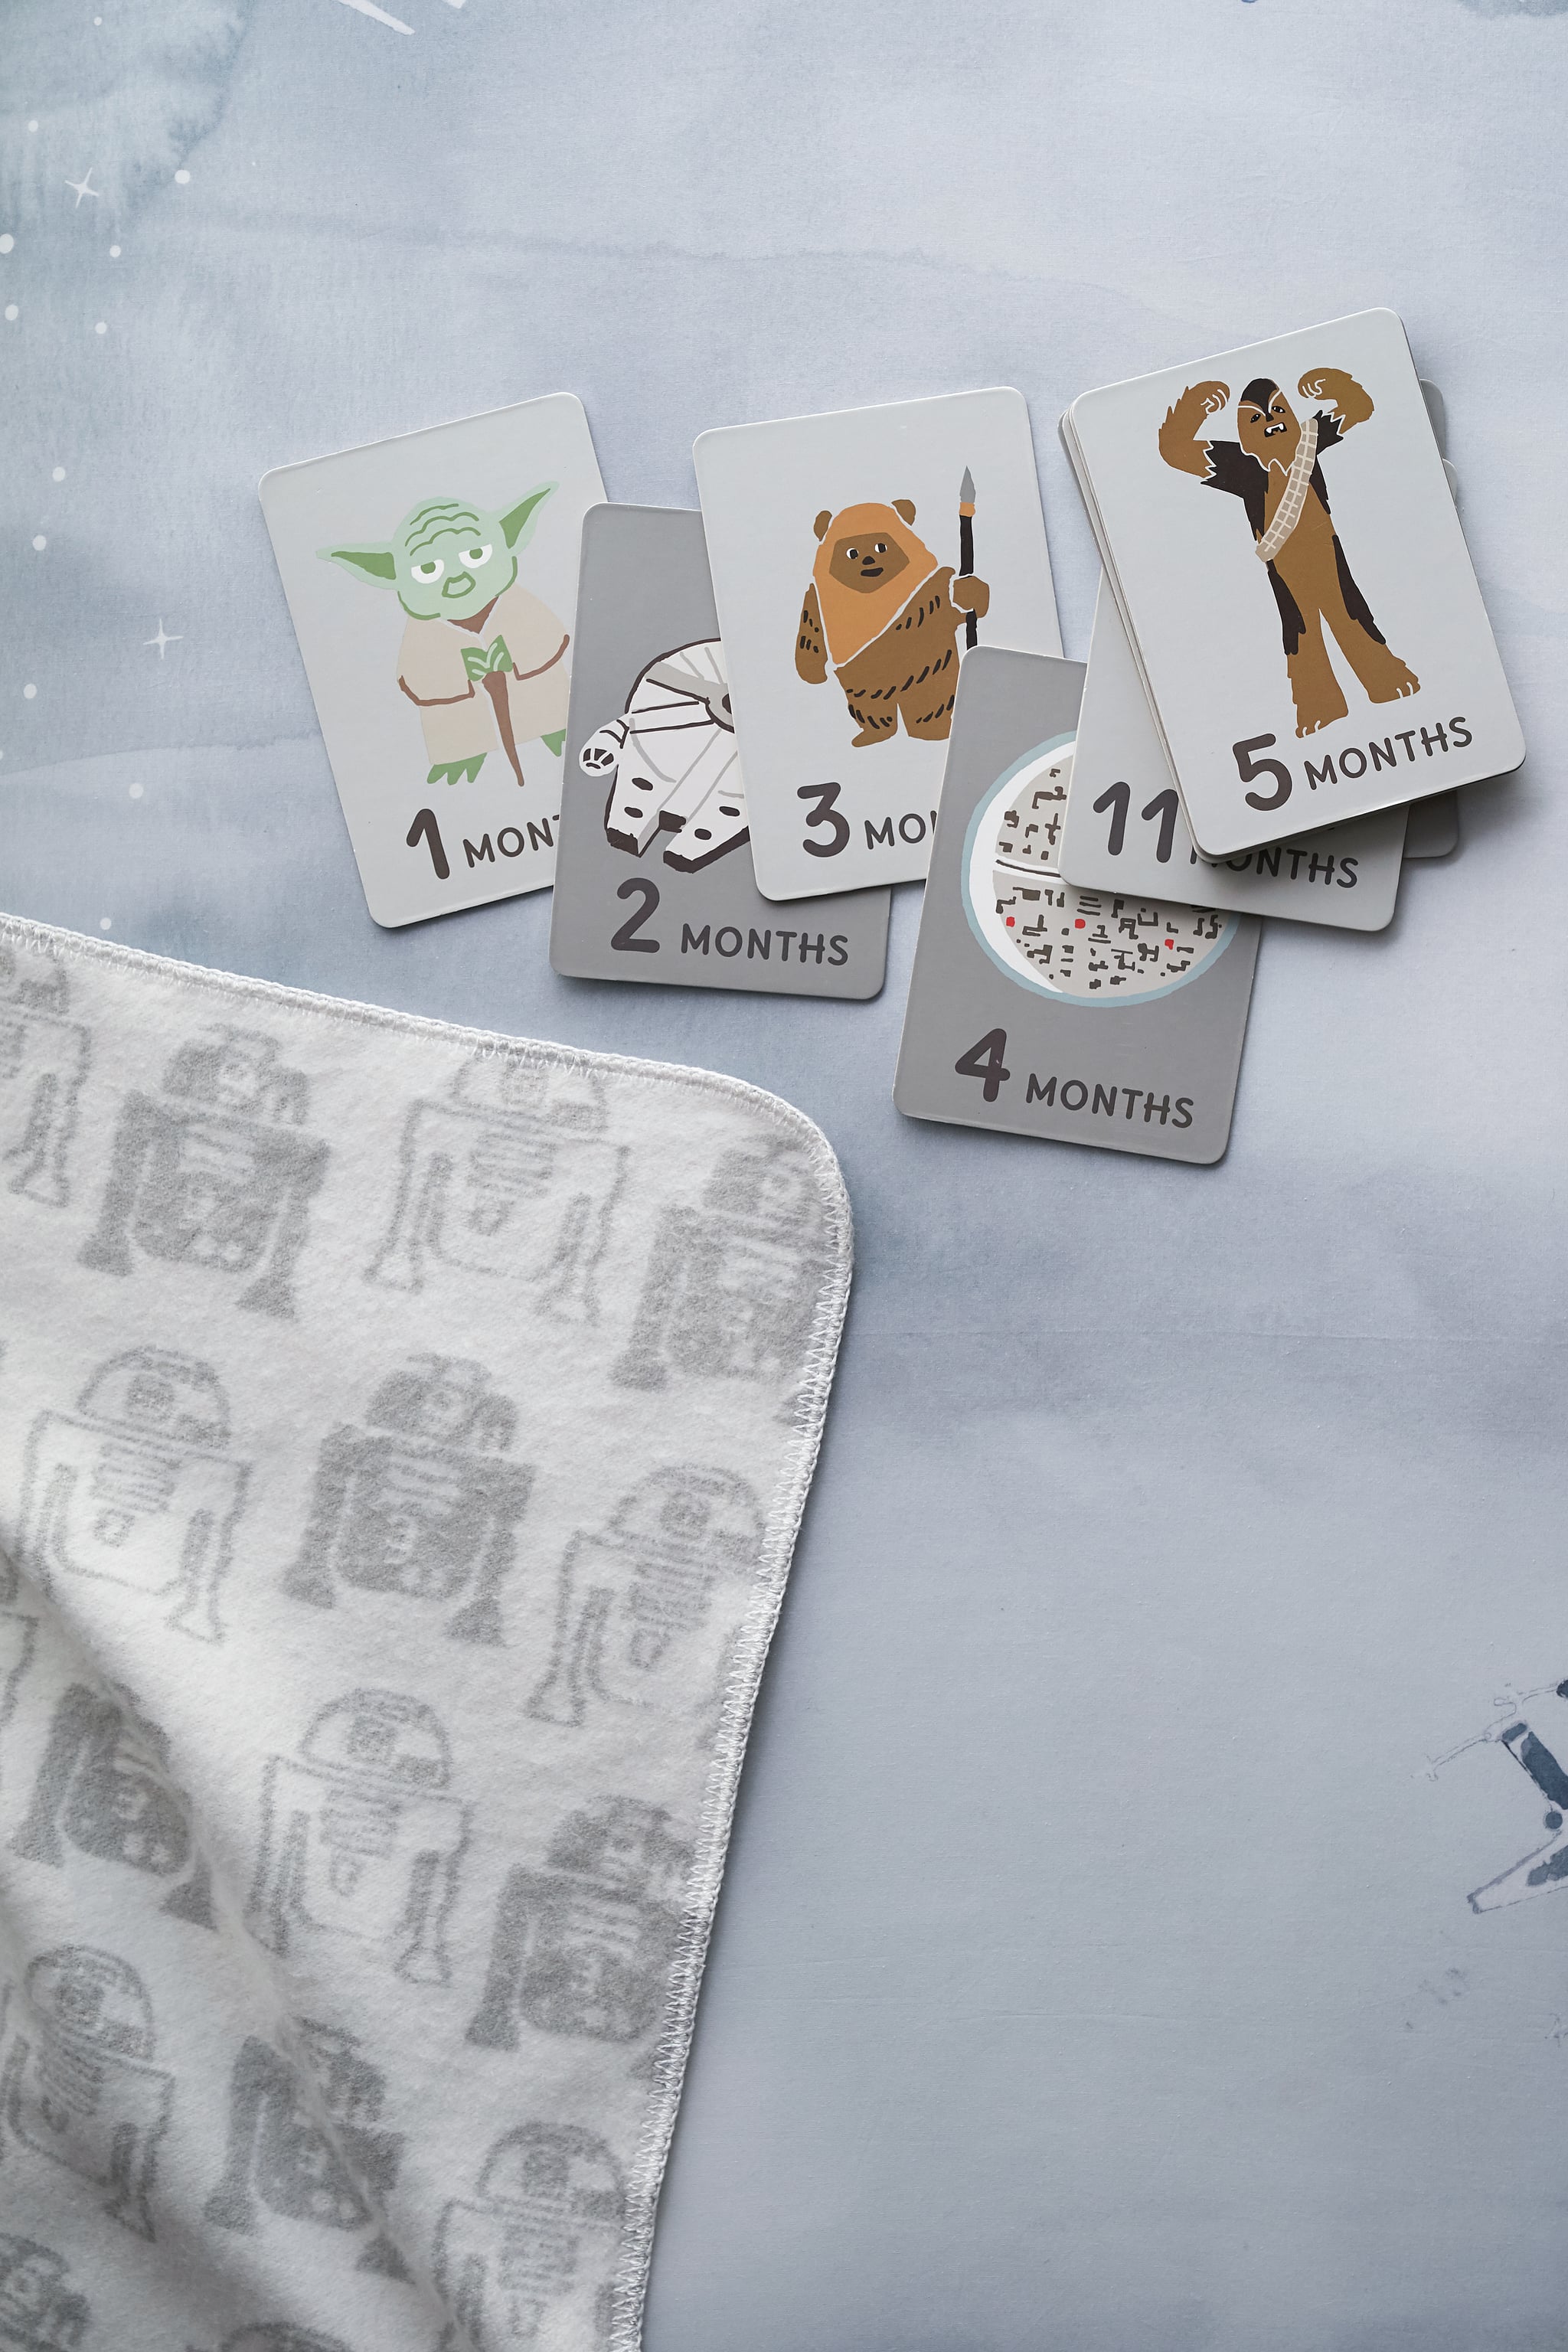 Star Wars Milestone Cards And Fuzzy Baby Blanket This Star Wars Collection From Pottery Barn Will Make You Scream